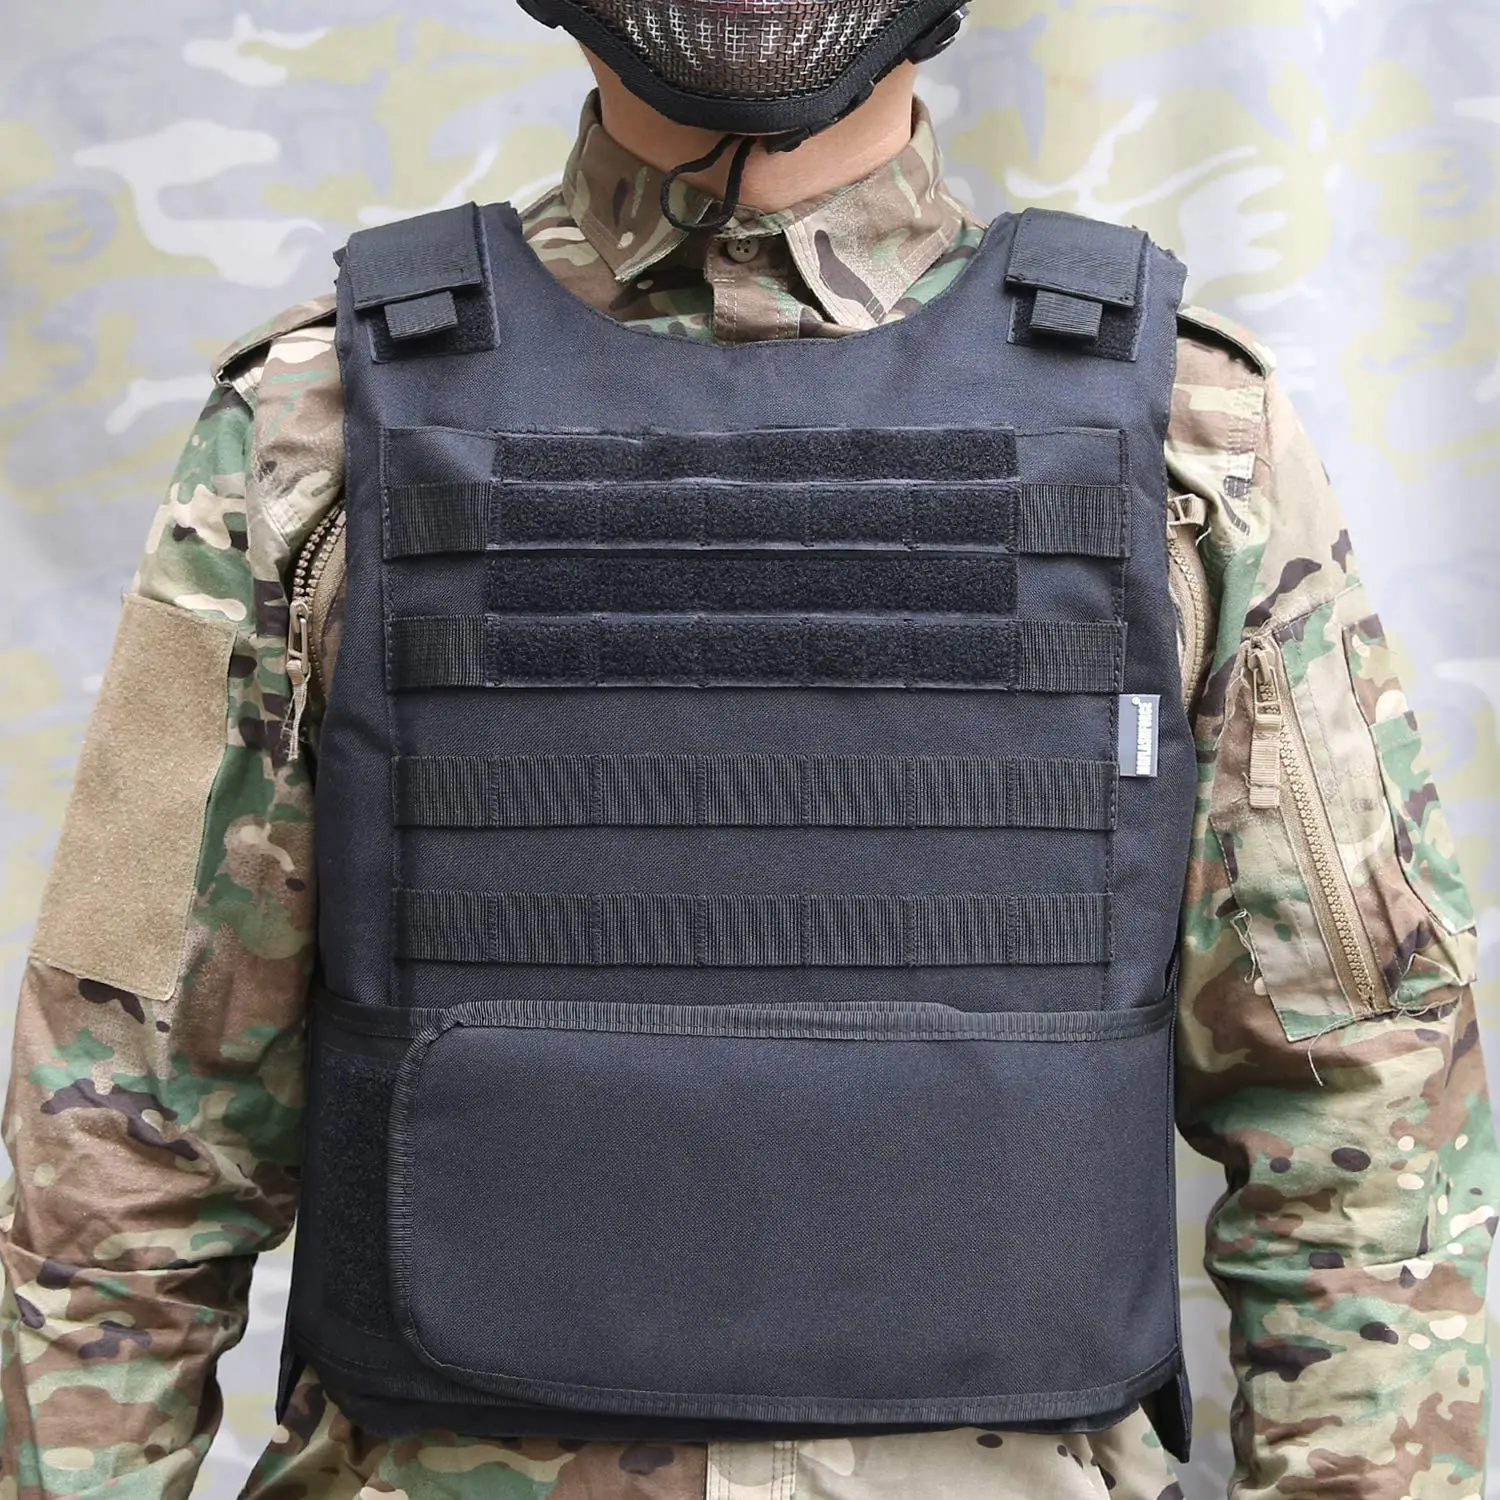 Tactical Military level iv  armor carrier army bulletproof vest